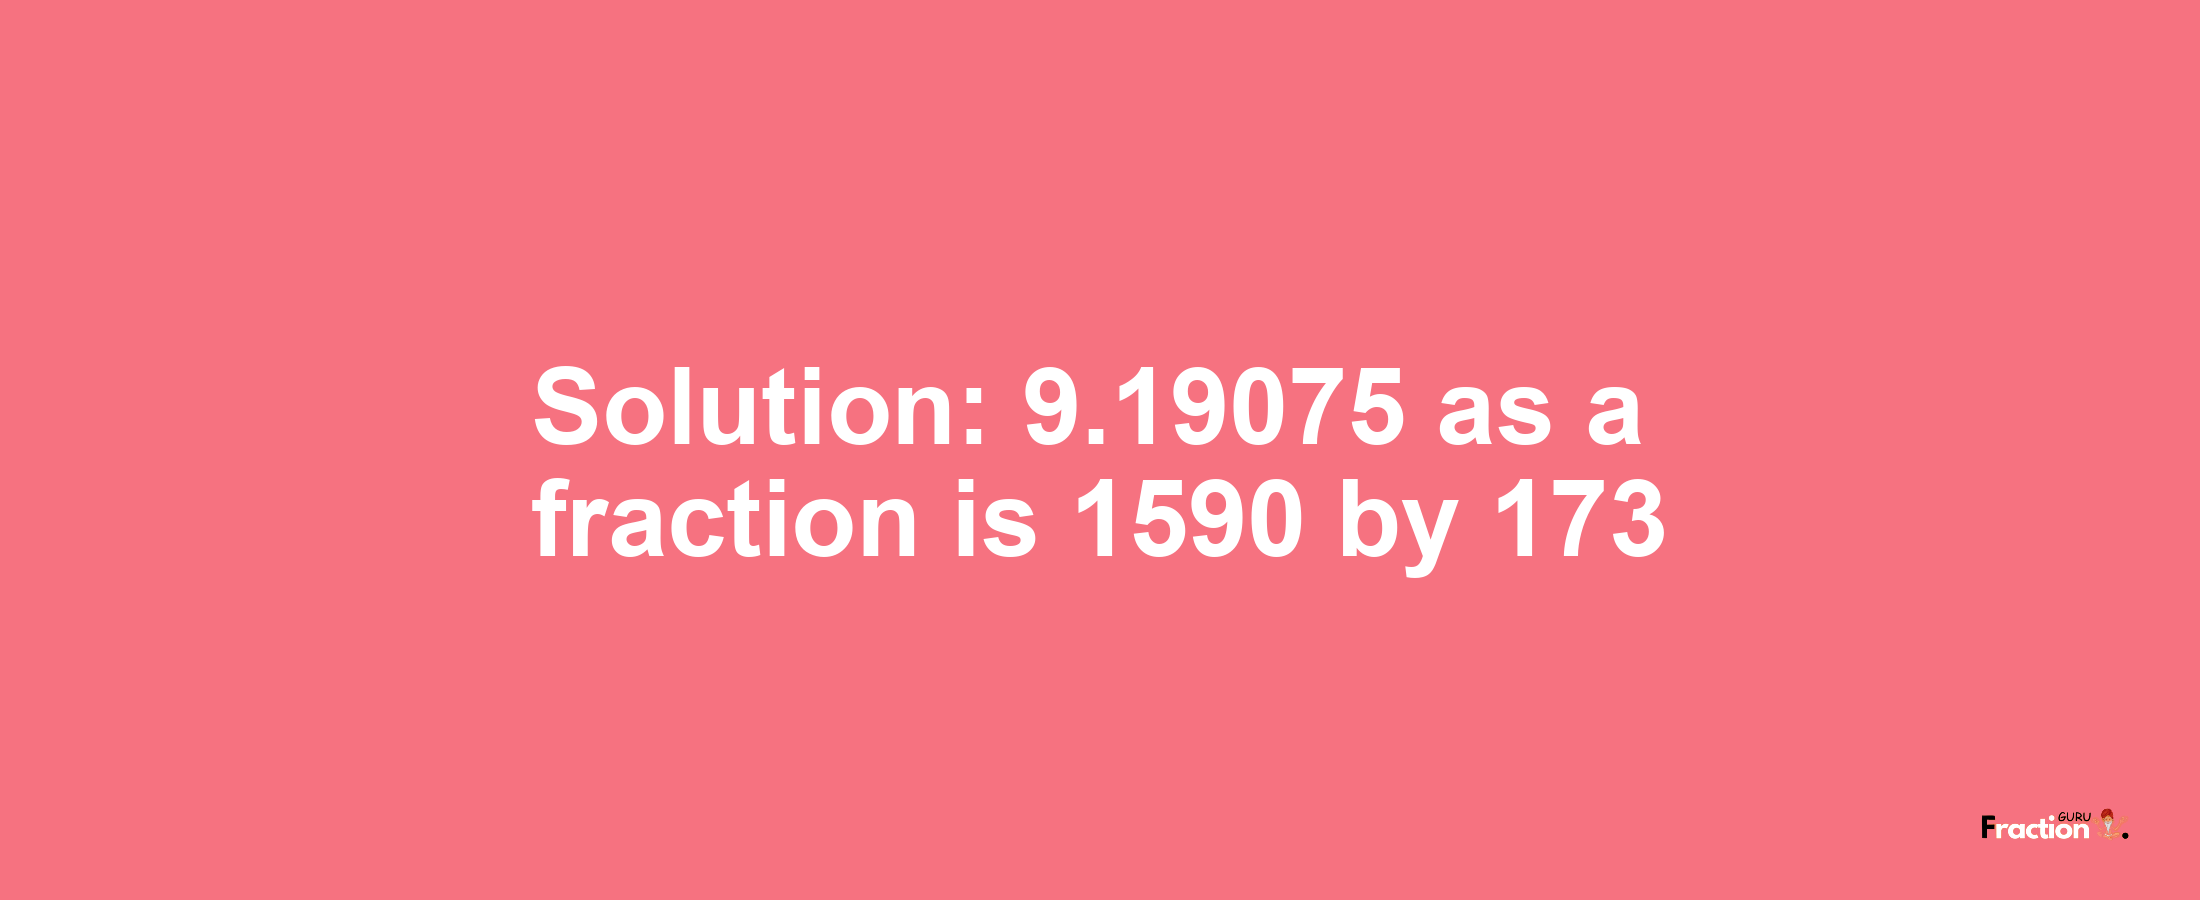 Solution:9.19075 as a fraction is 1590/173